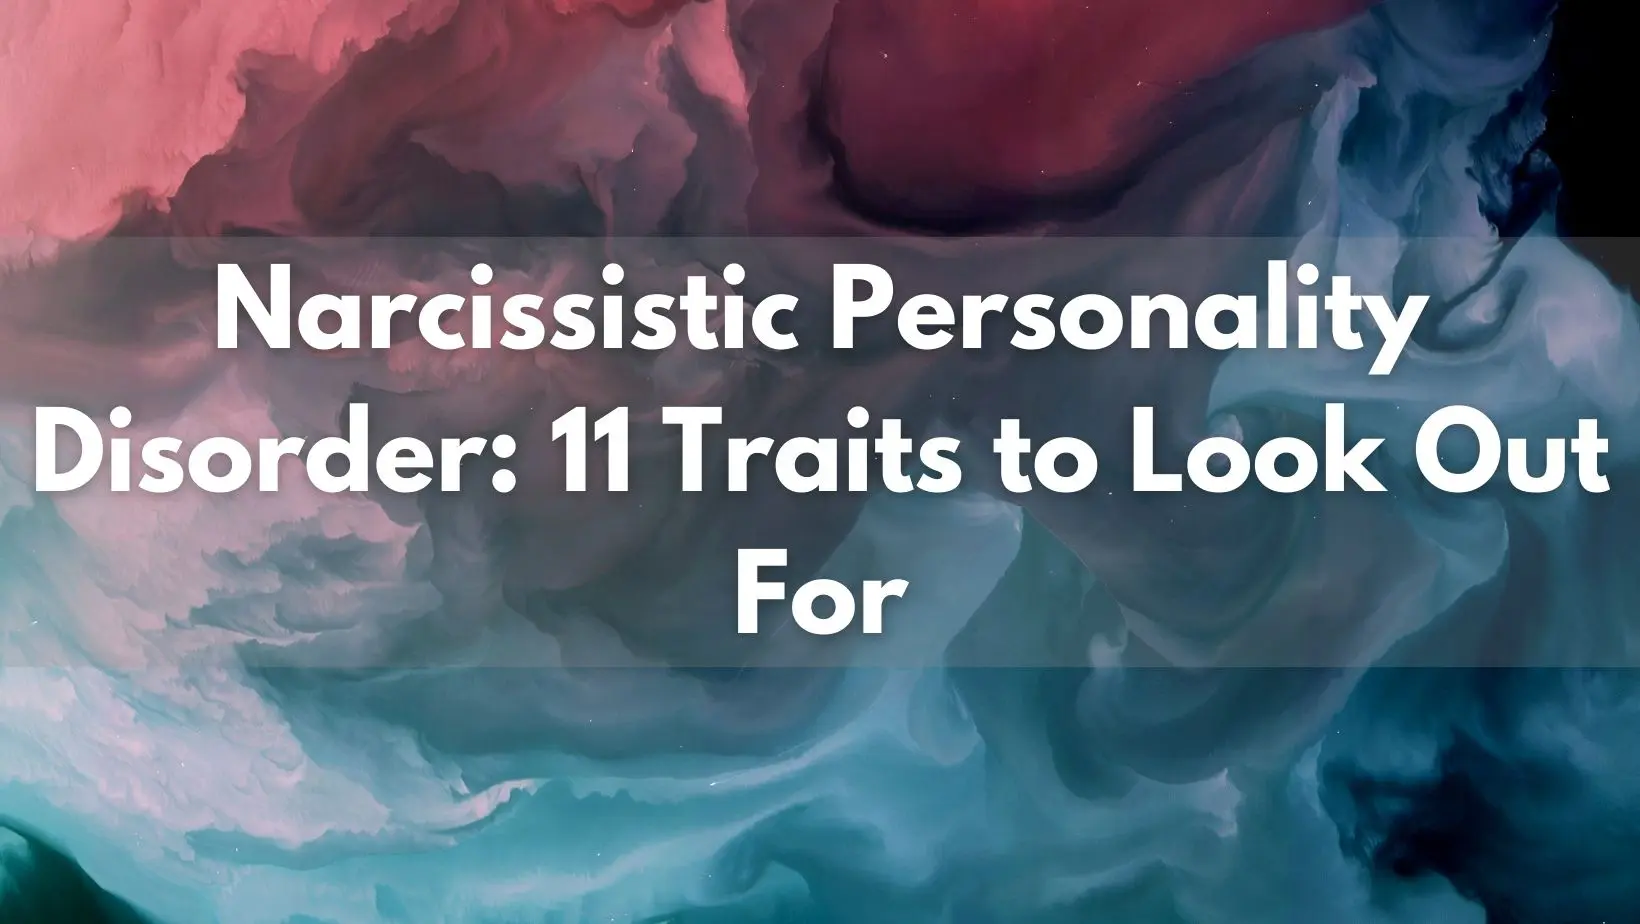 narcissistic-personality-disorder